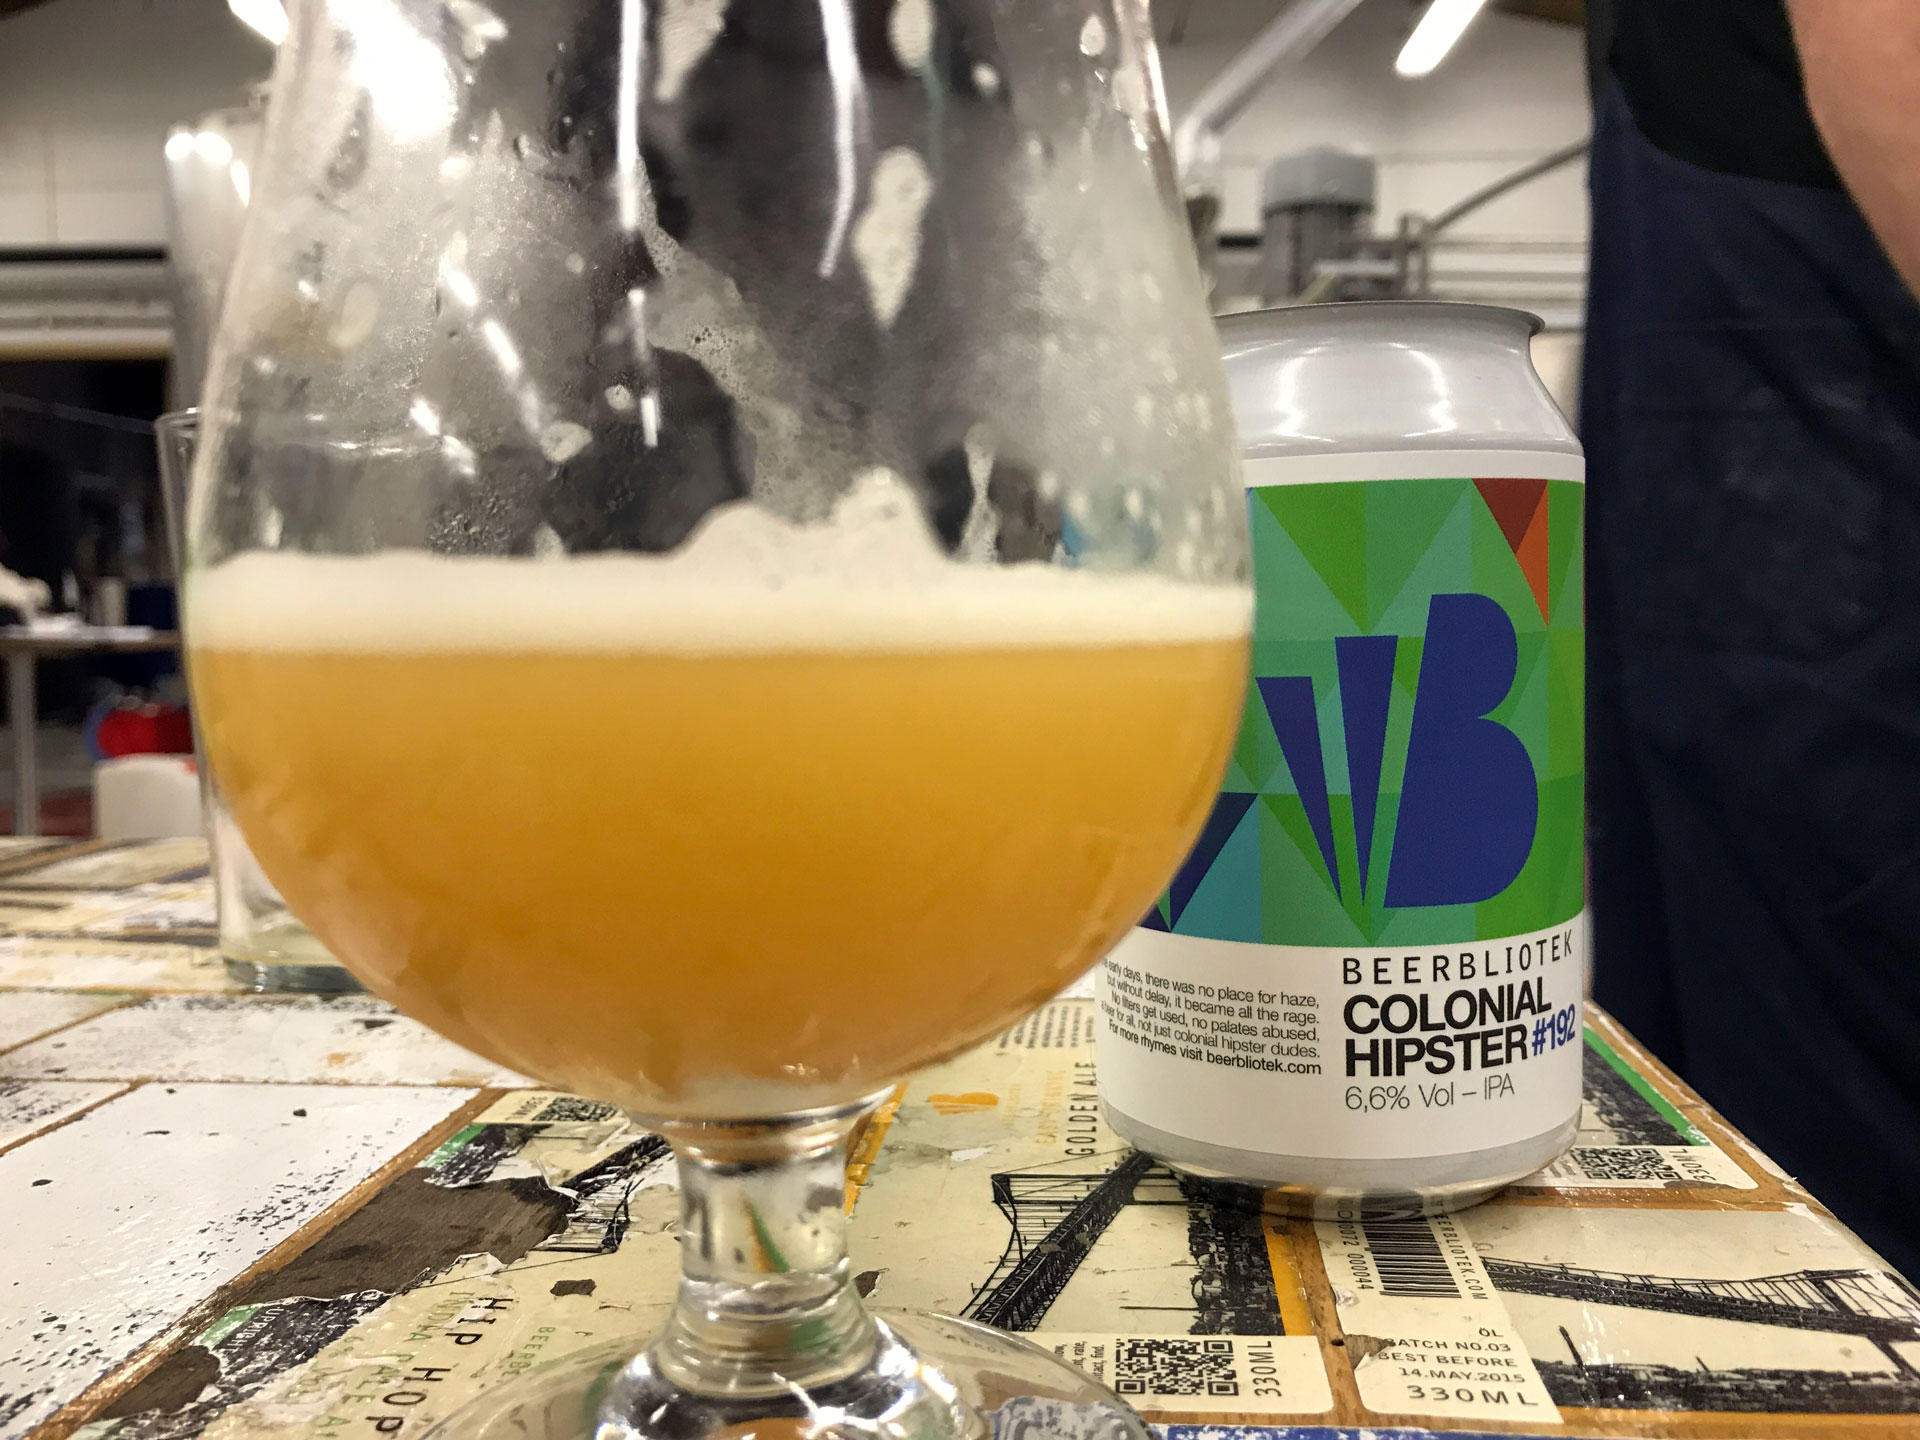 Tasting a freshly canned New England IPA called Colonial Hipster.